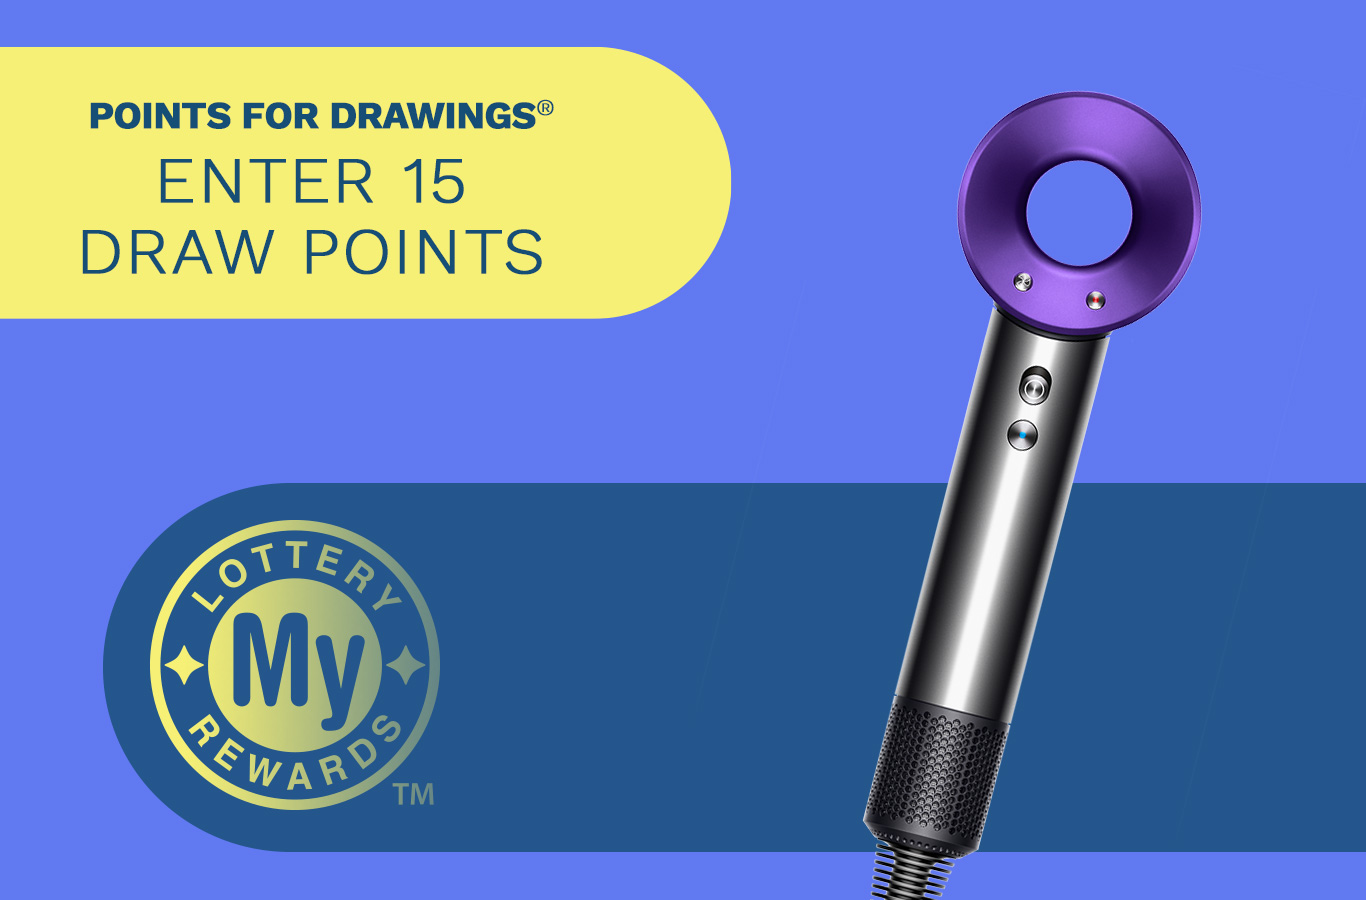 Here's your chance to win a Dyson® Supersonic™ Hair Dryer! Enter by Tuesday, October 4th.